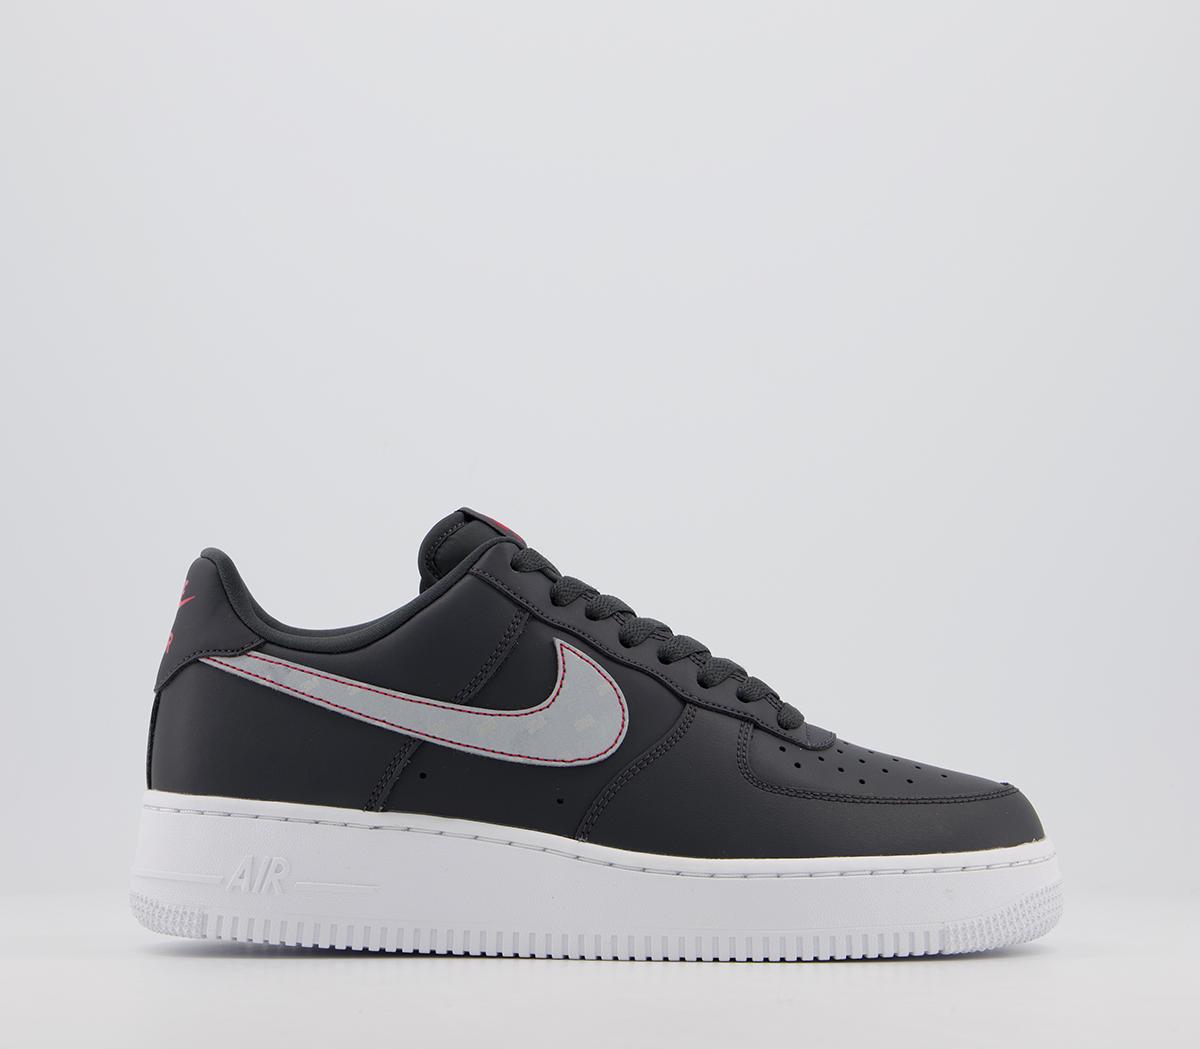 NikeNike Air Force One TrainersAnthracite Silver University Red White